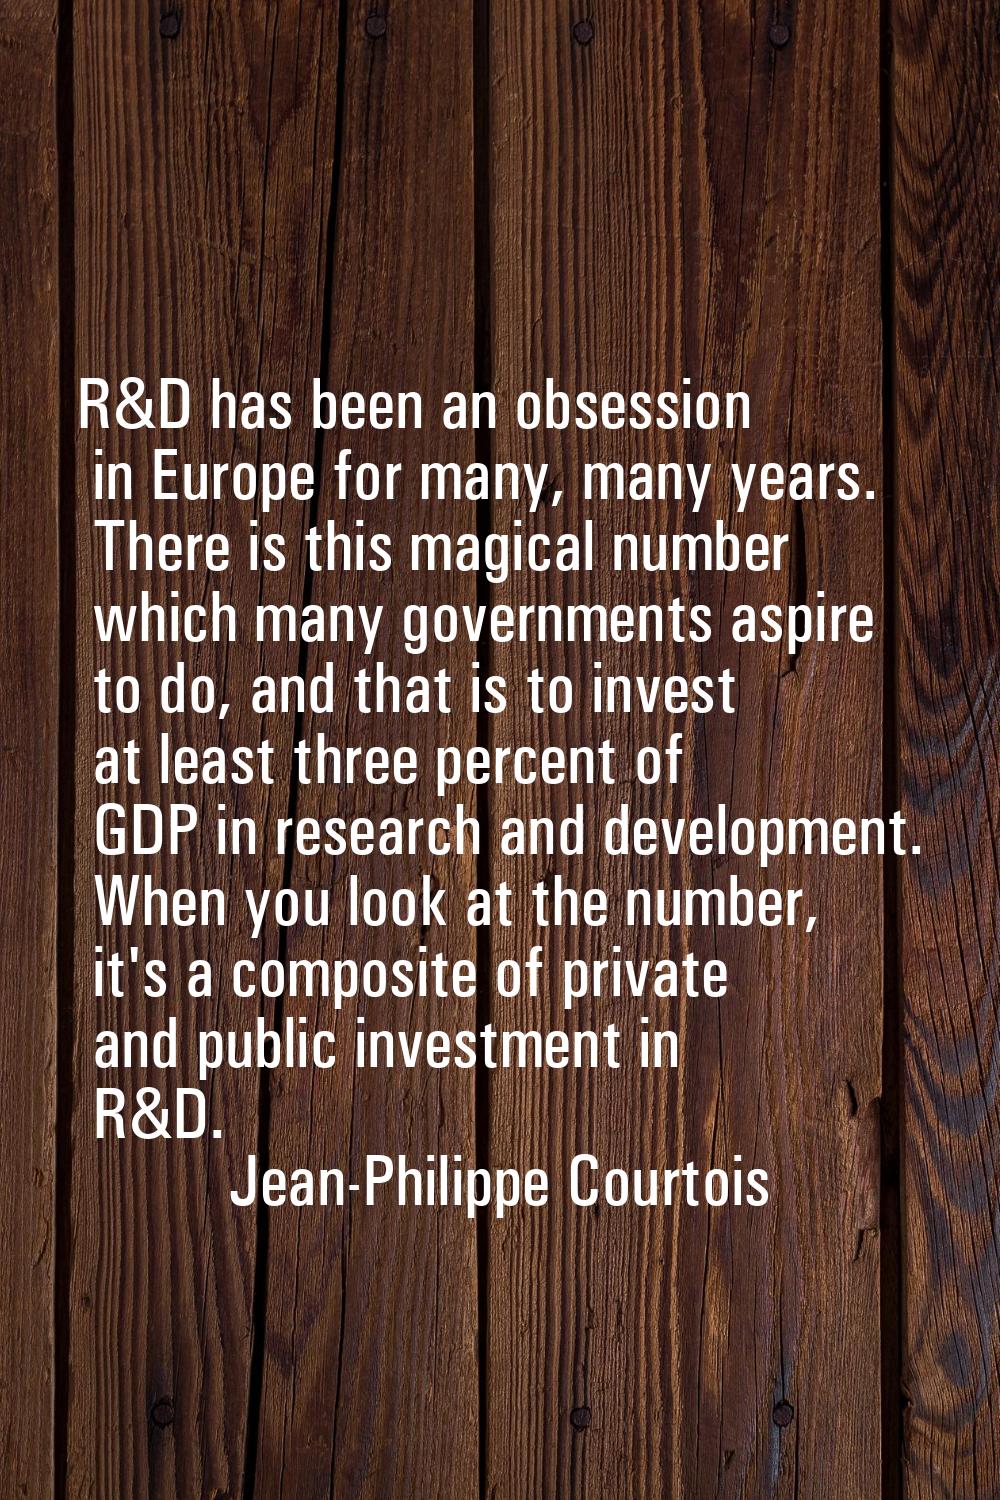 R&D has been an obsession in Europe for many, many years. There is this magical number which many g